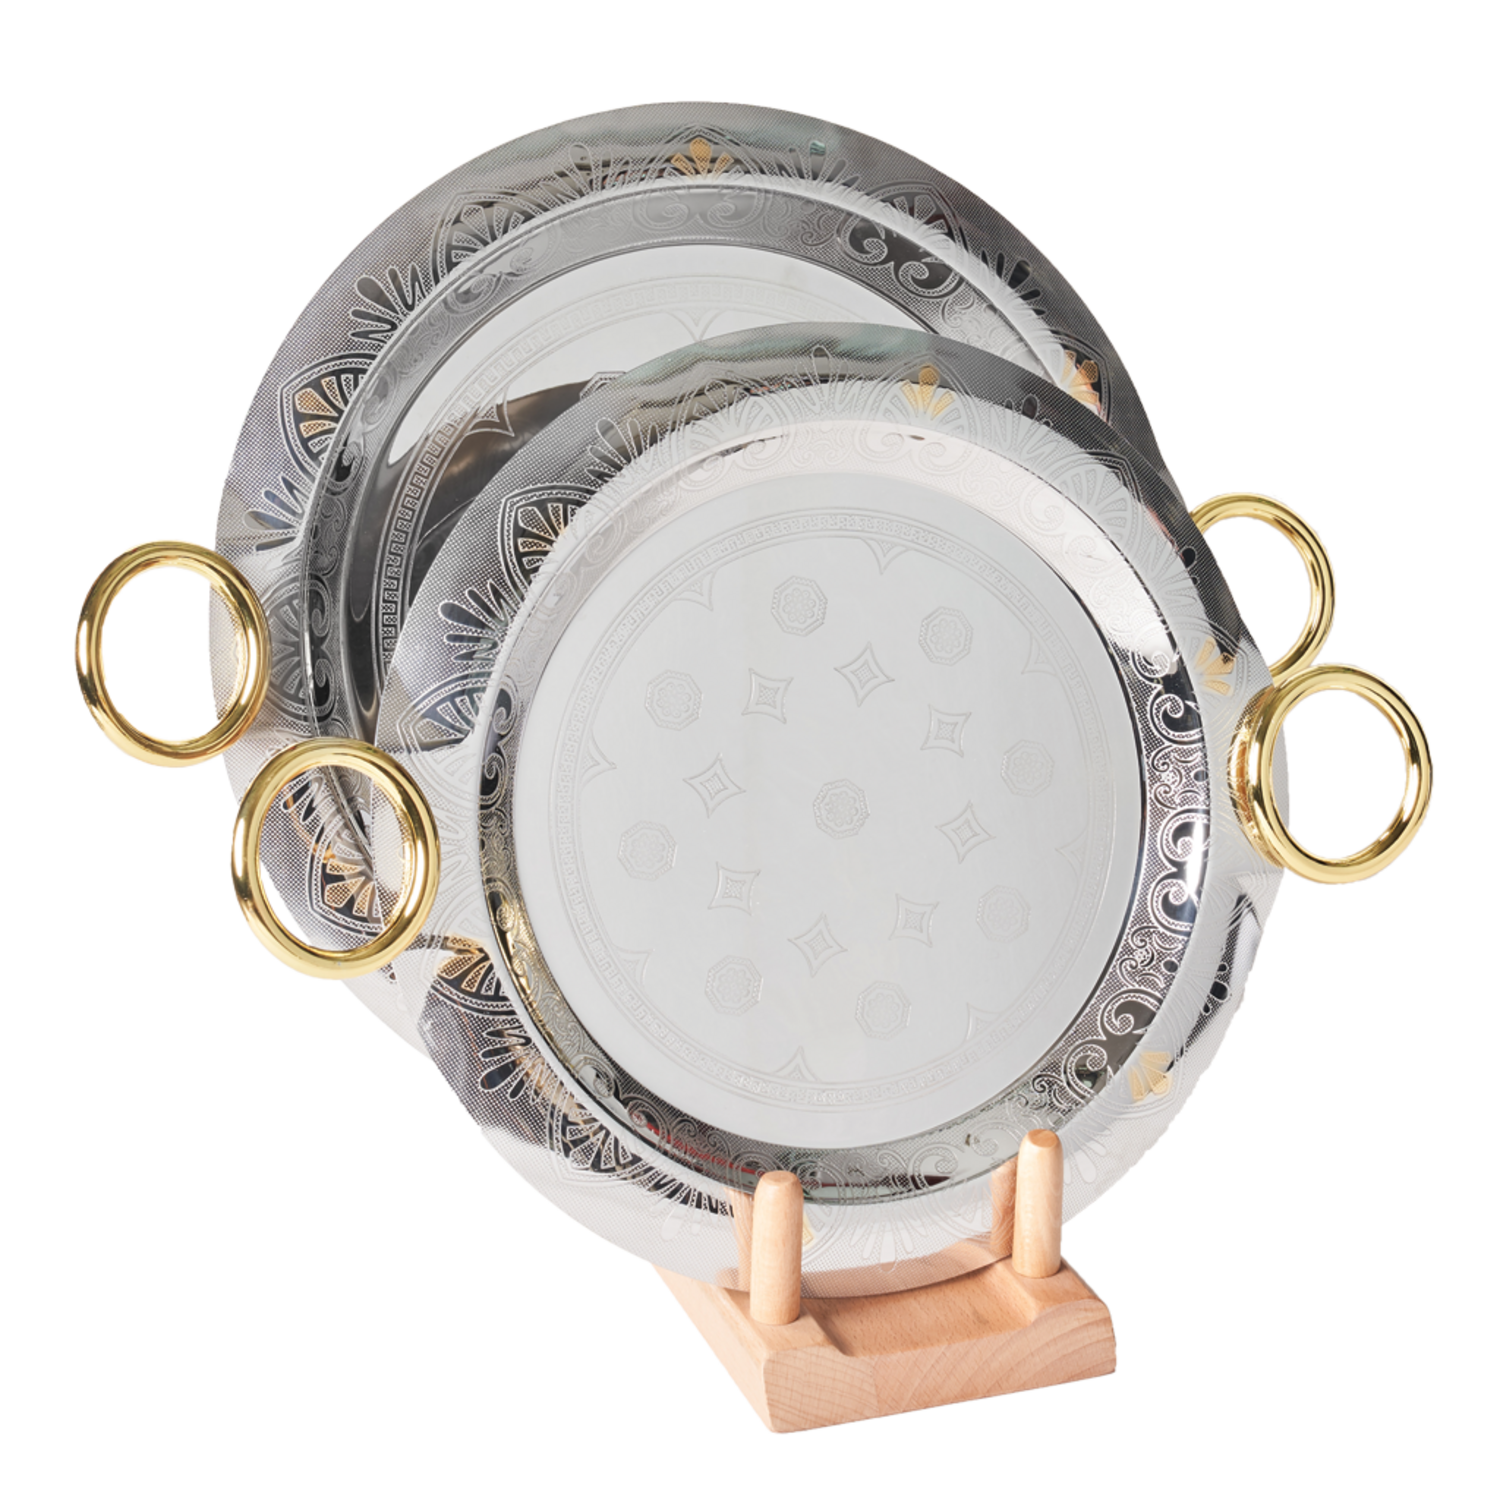 Arsha Round Tray with Handles, 2 Pieces -Silver & Gold -Stainless Steel